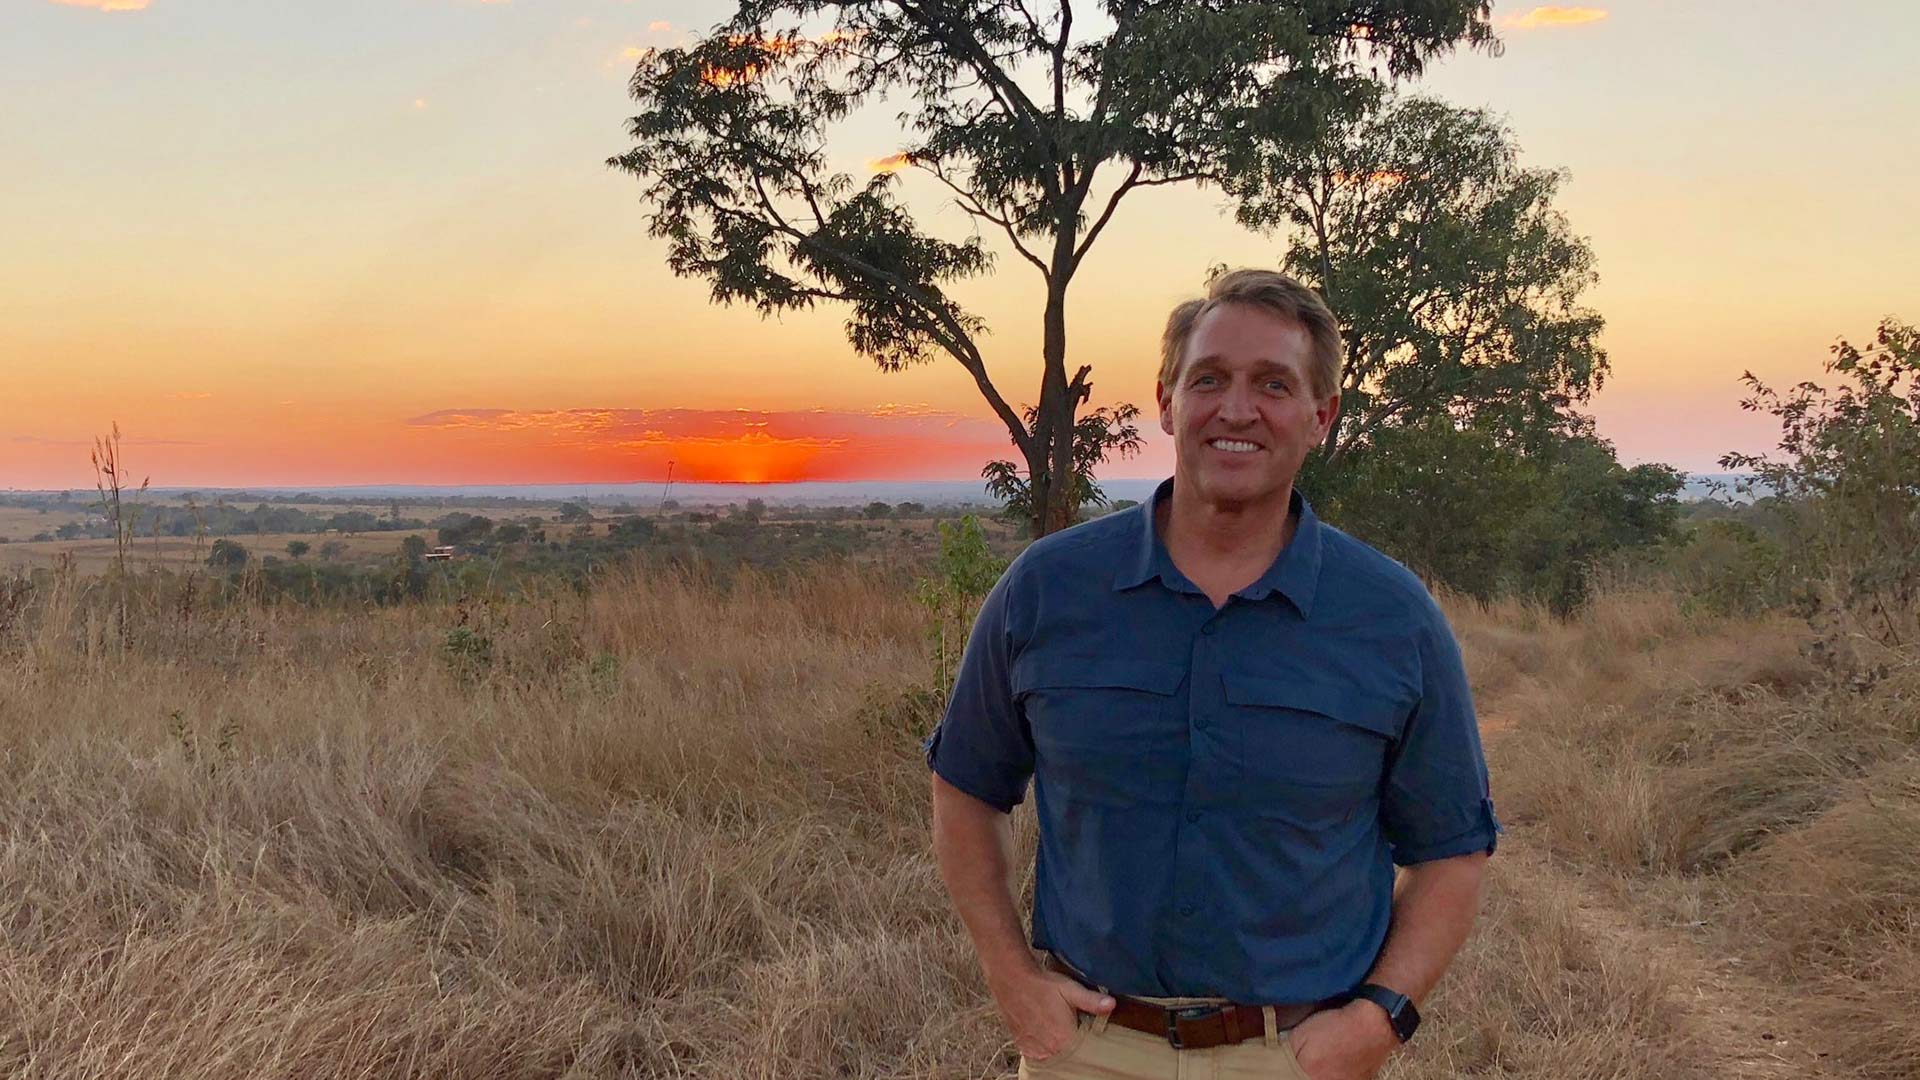 Sen. Jeff Flake is shown in Zimbabwe in this photo shared on social media.